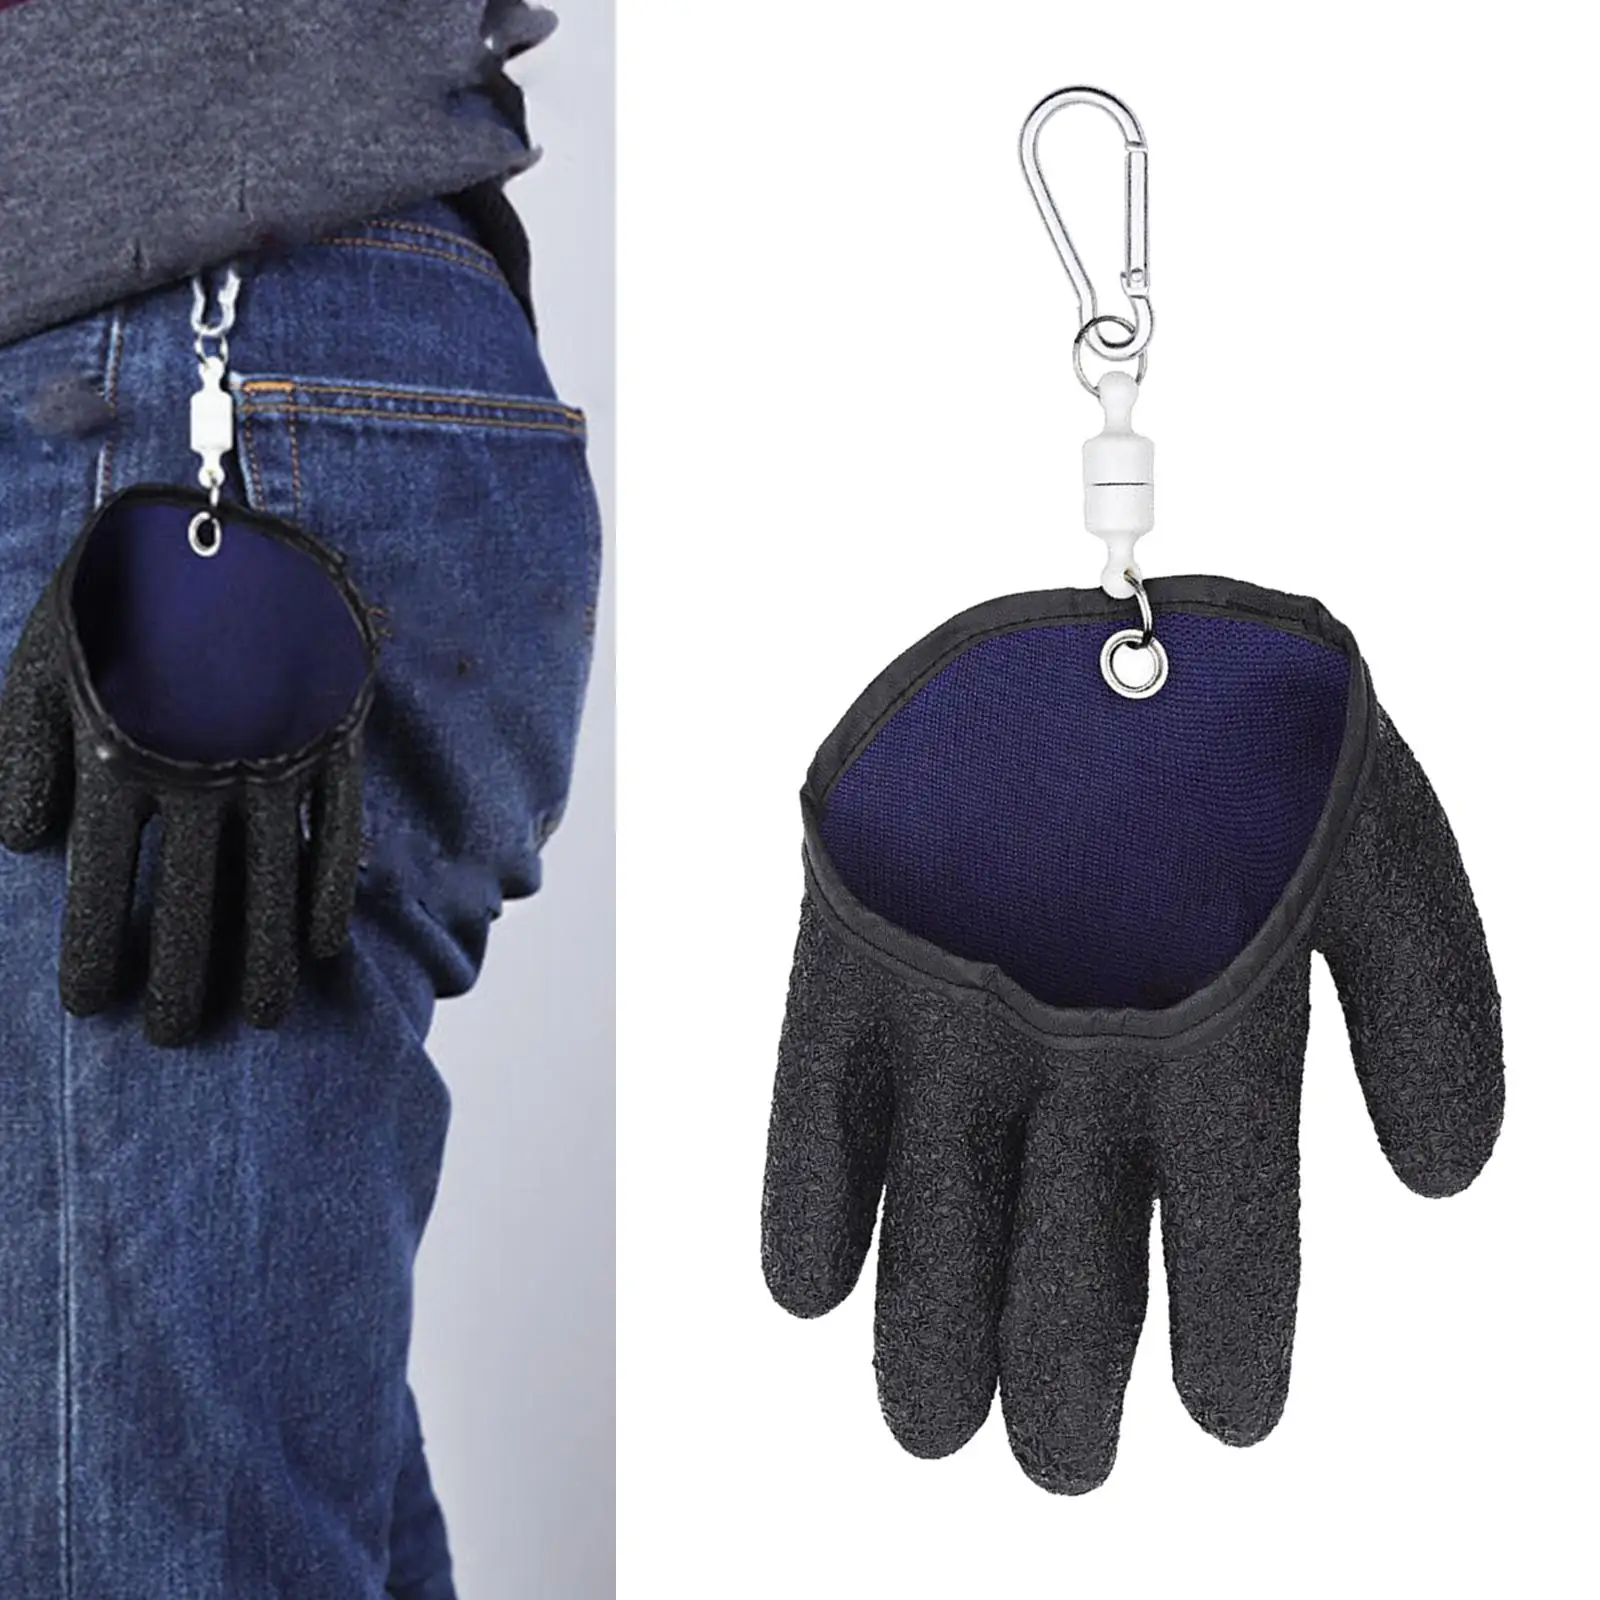 Fishing Glove with / Release, Professional Fisherman Fish Gloves